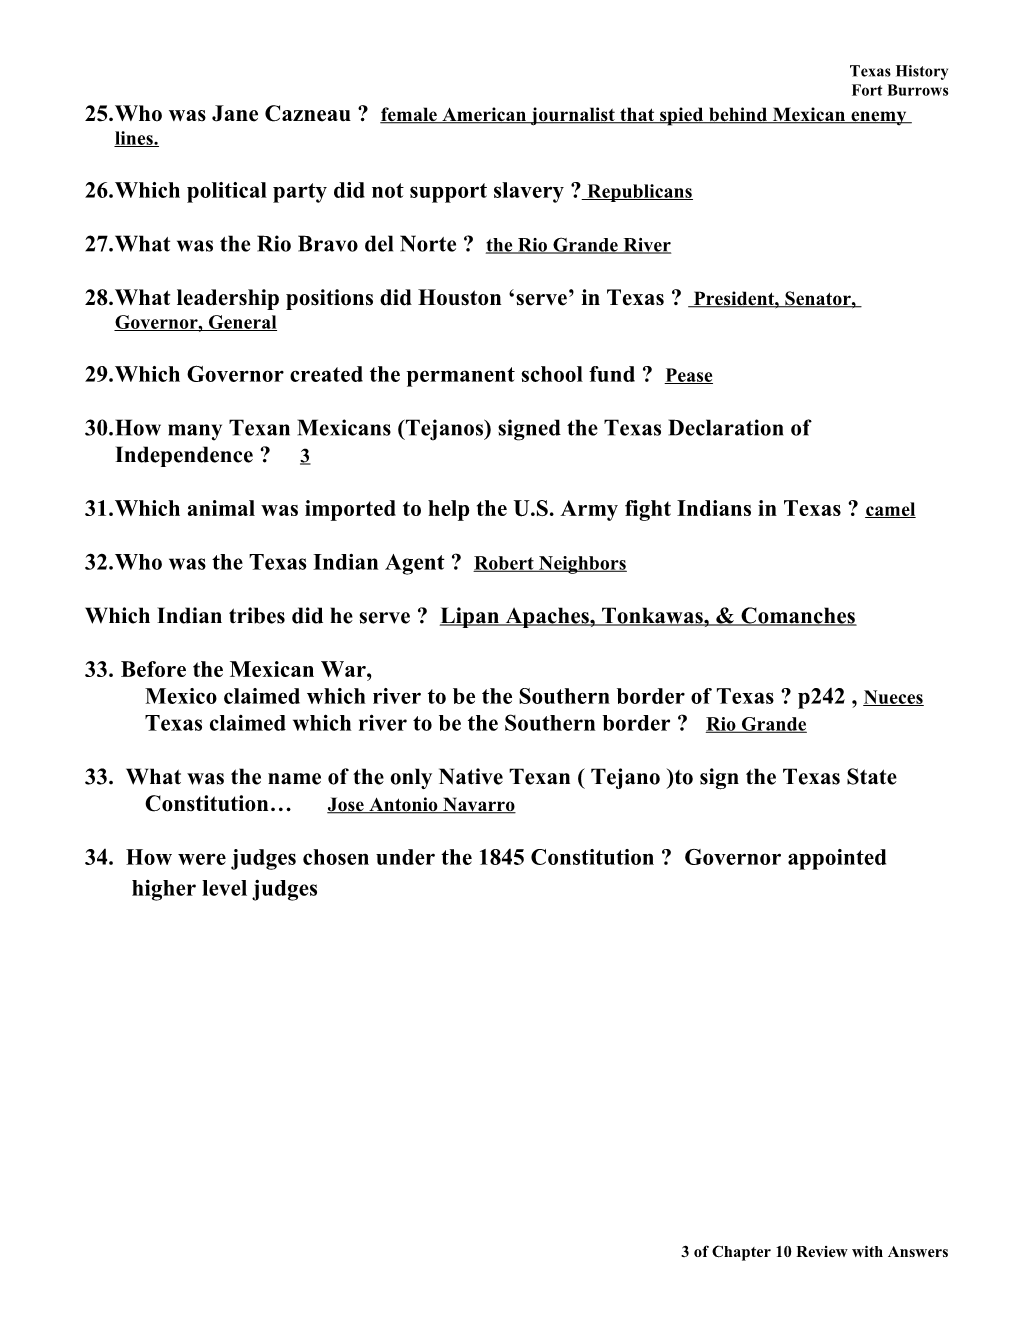 Chapter 10 Review with Answers